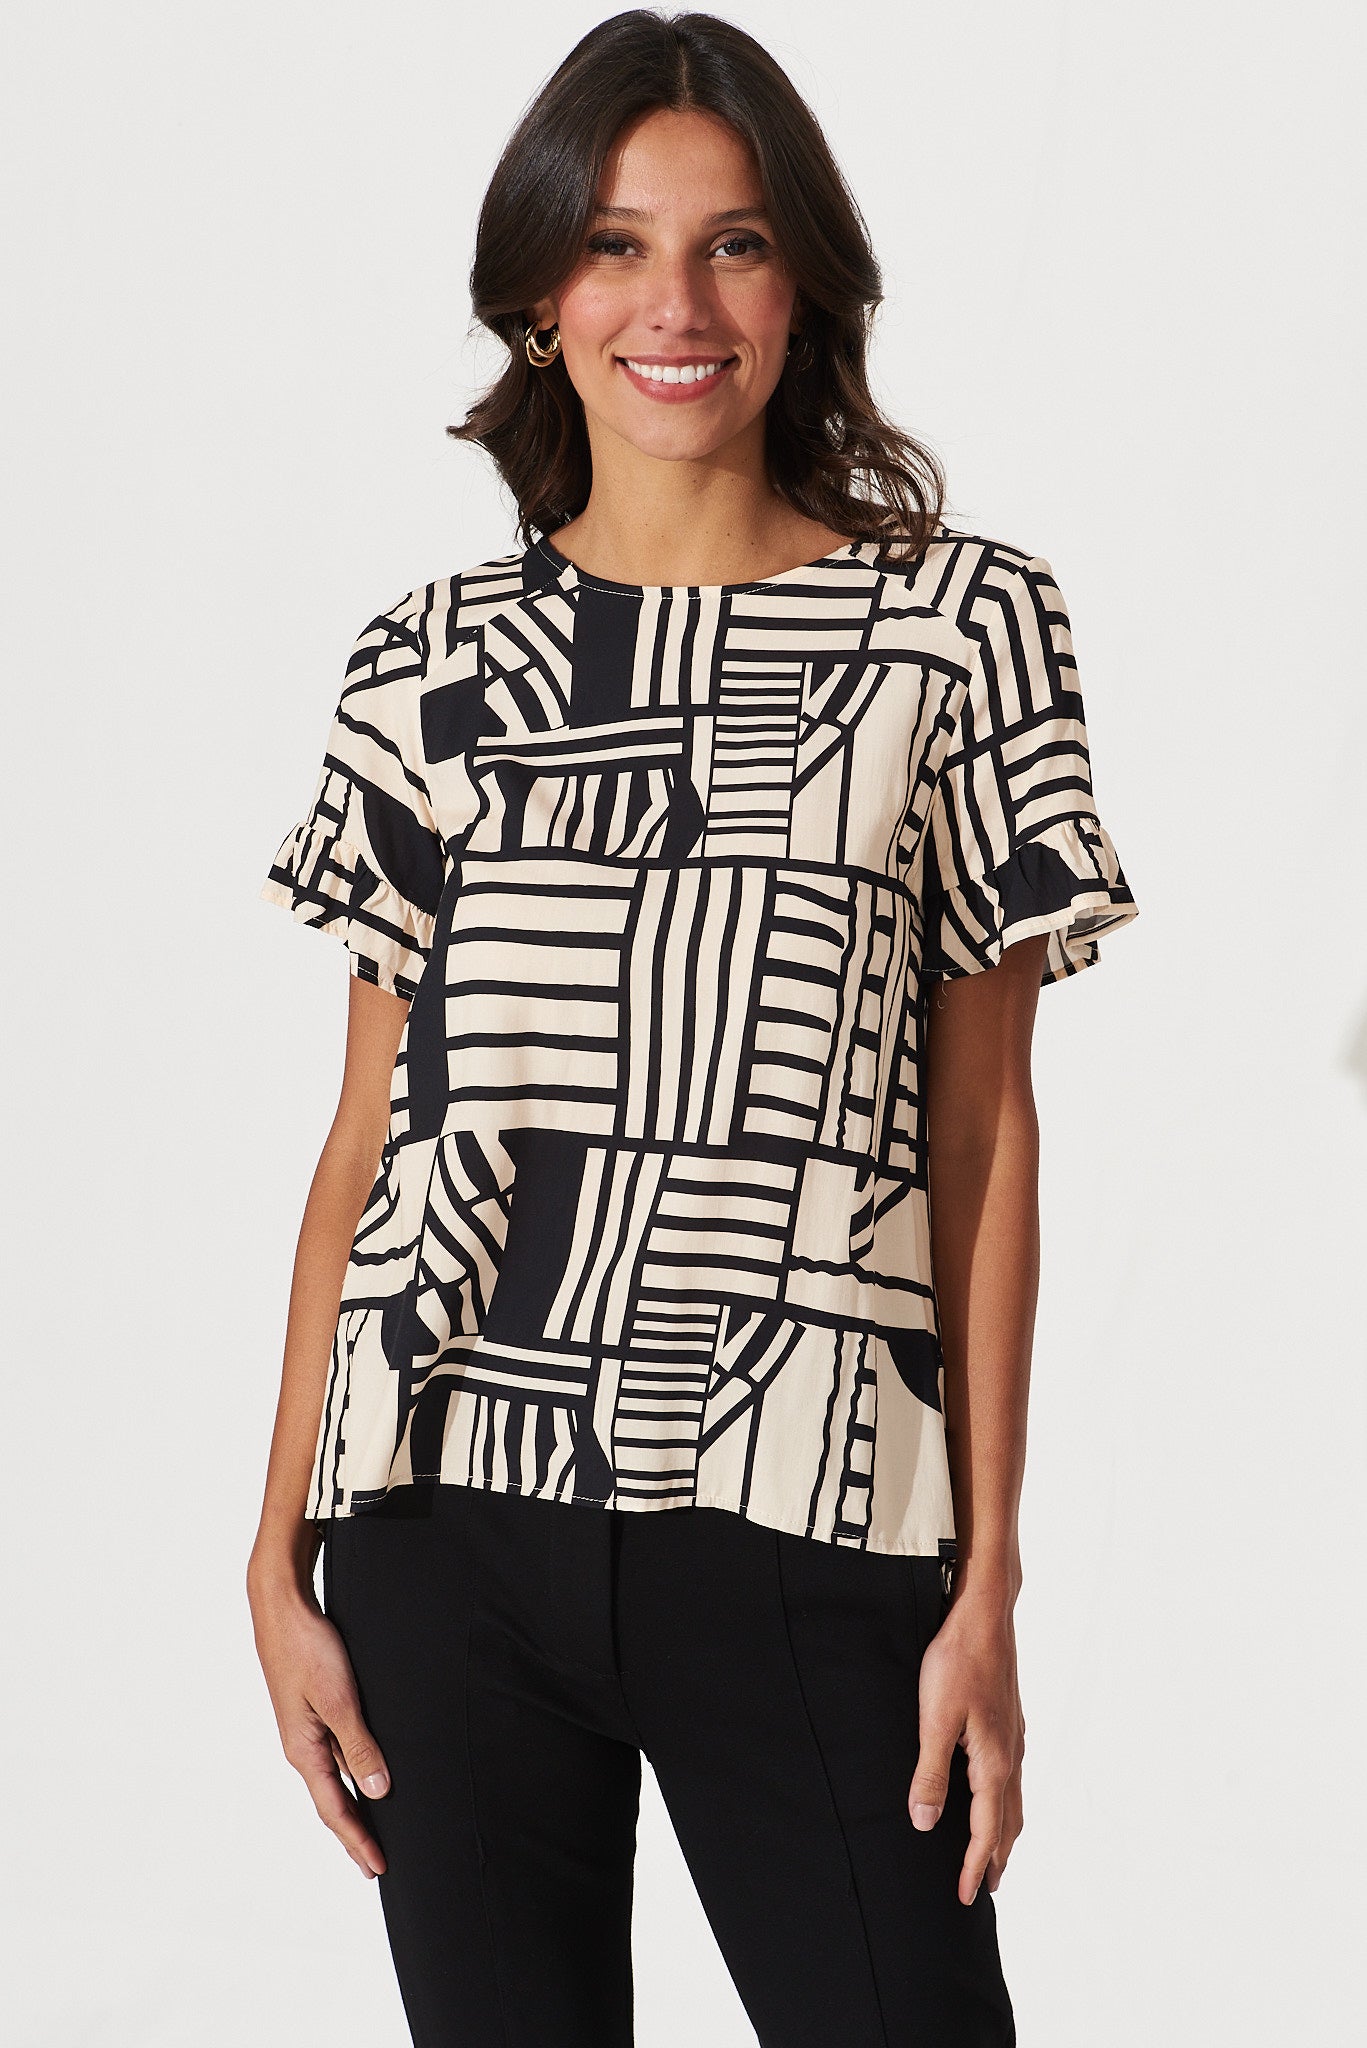 Elle Top In Cream And Black Geometric Print - front